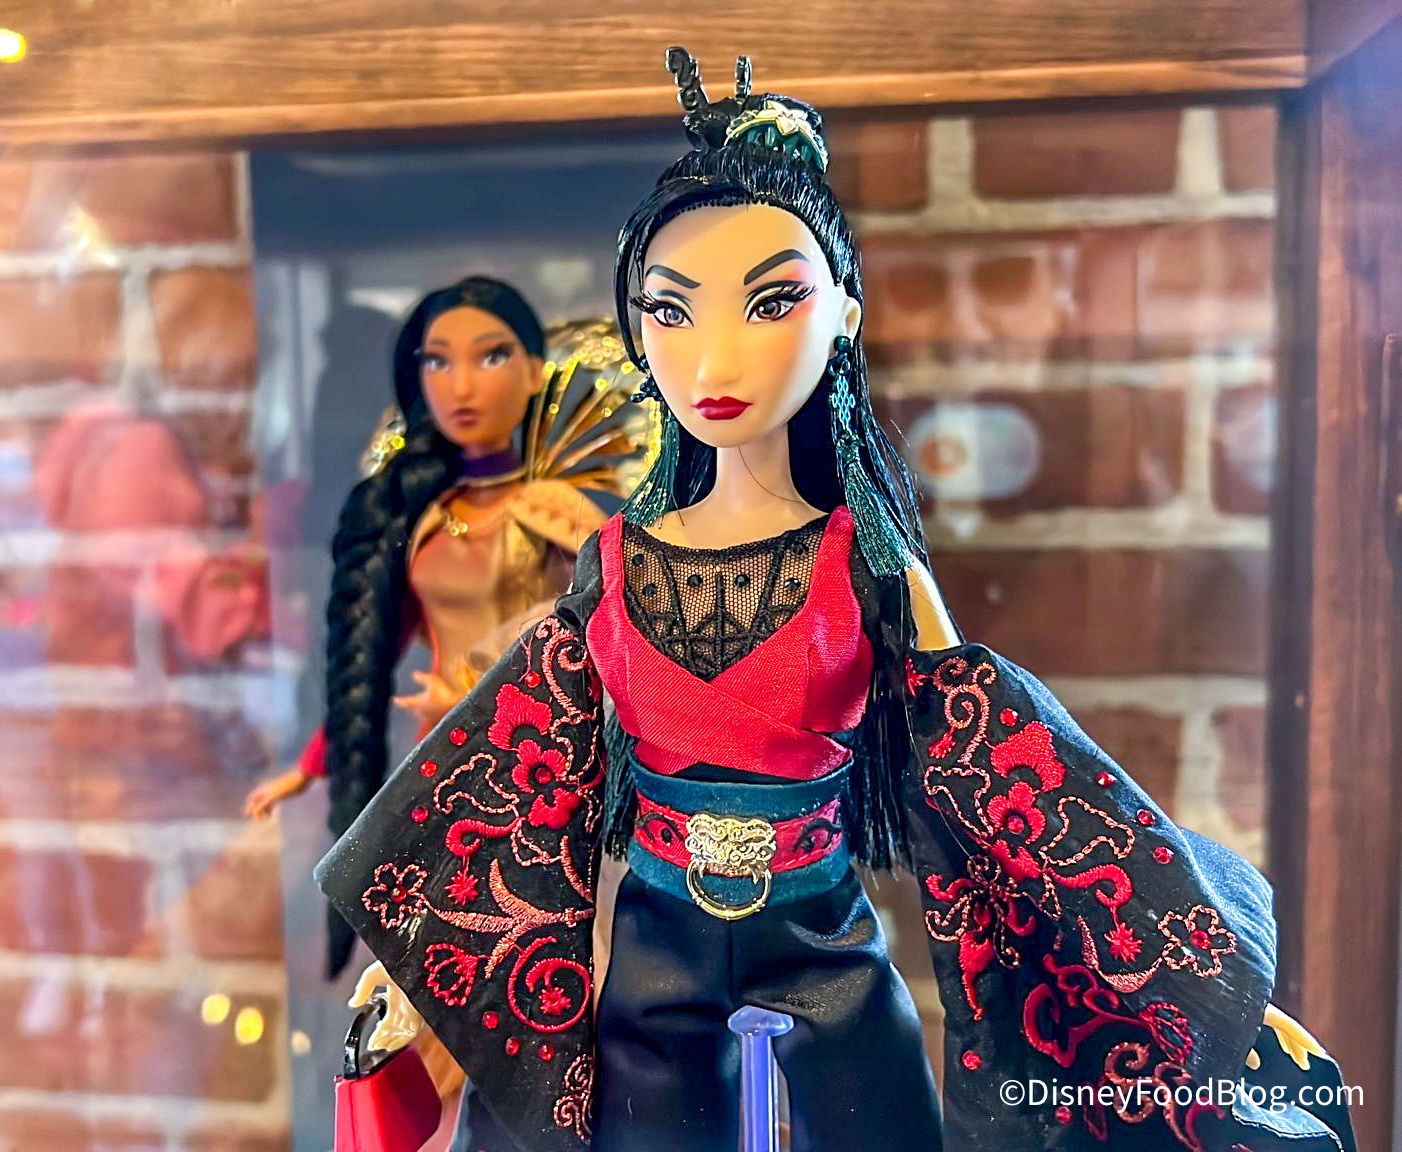 The Newest 130 Designer Doll Features The FIRST Disney Princess